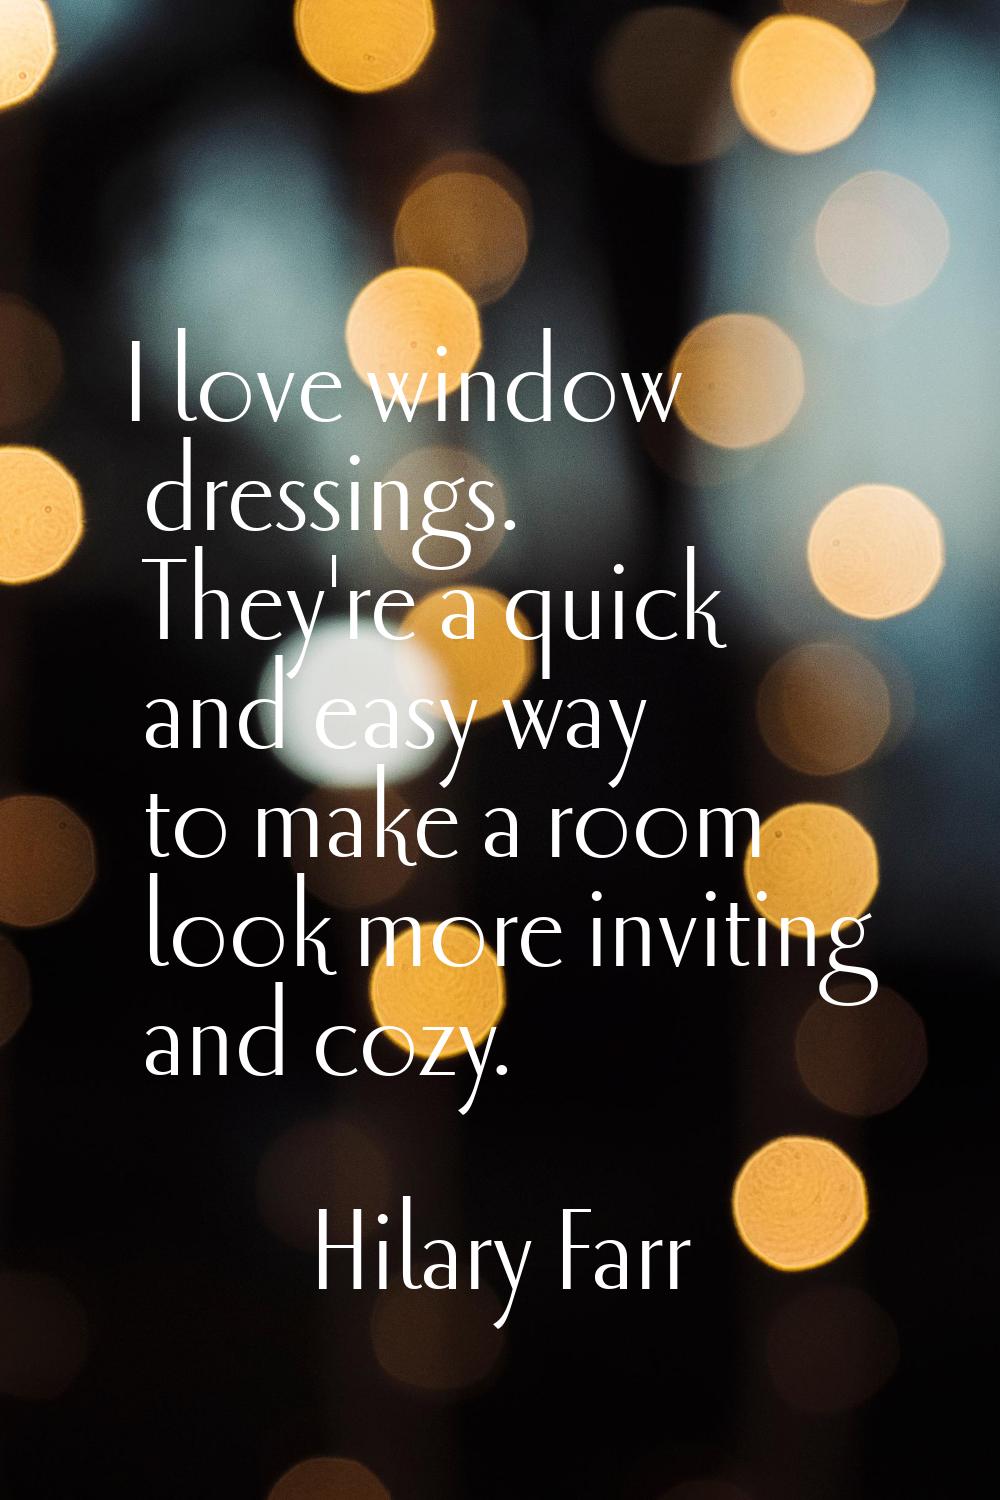 I love window dressings. They're a quick and easy way to make a room look more inviting and cozy.